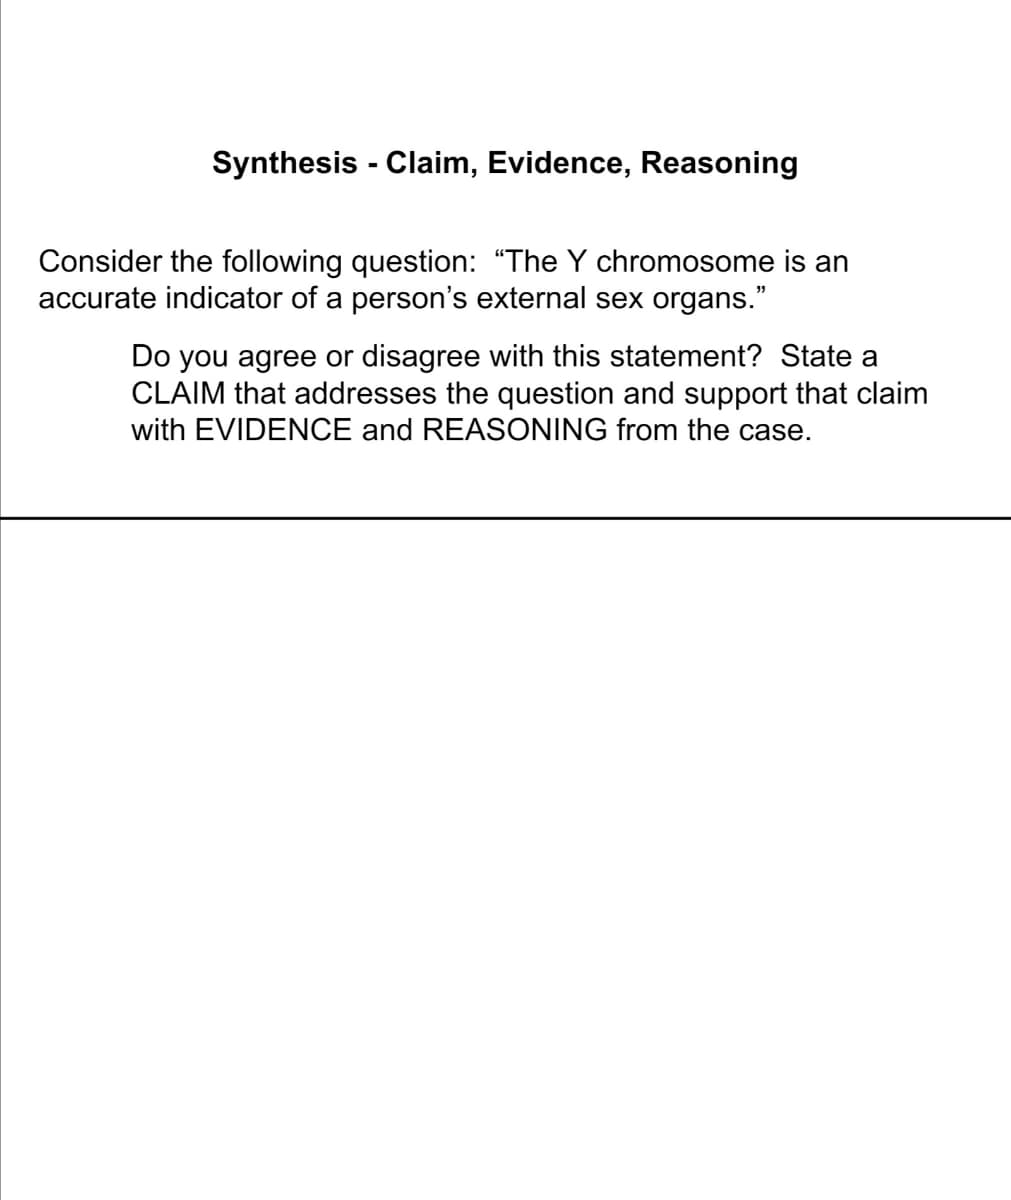 Synthesis - Claim, Evidence, Reasoning
Consider the following question: “The Y chromosome is an
accurate indicator of a person's external sex organs."
Do you agree or disagree with this statement? State a
CLAIM that addresses the question and support that claim
with EVIDENCE and REASONING from the case.
